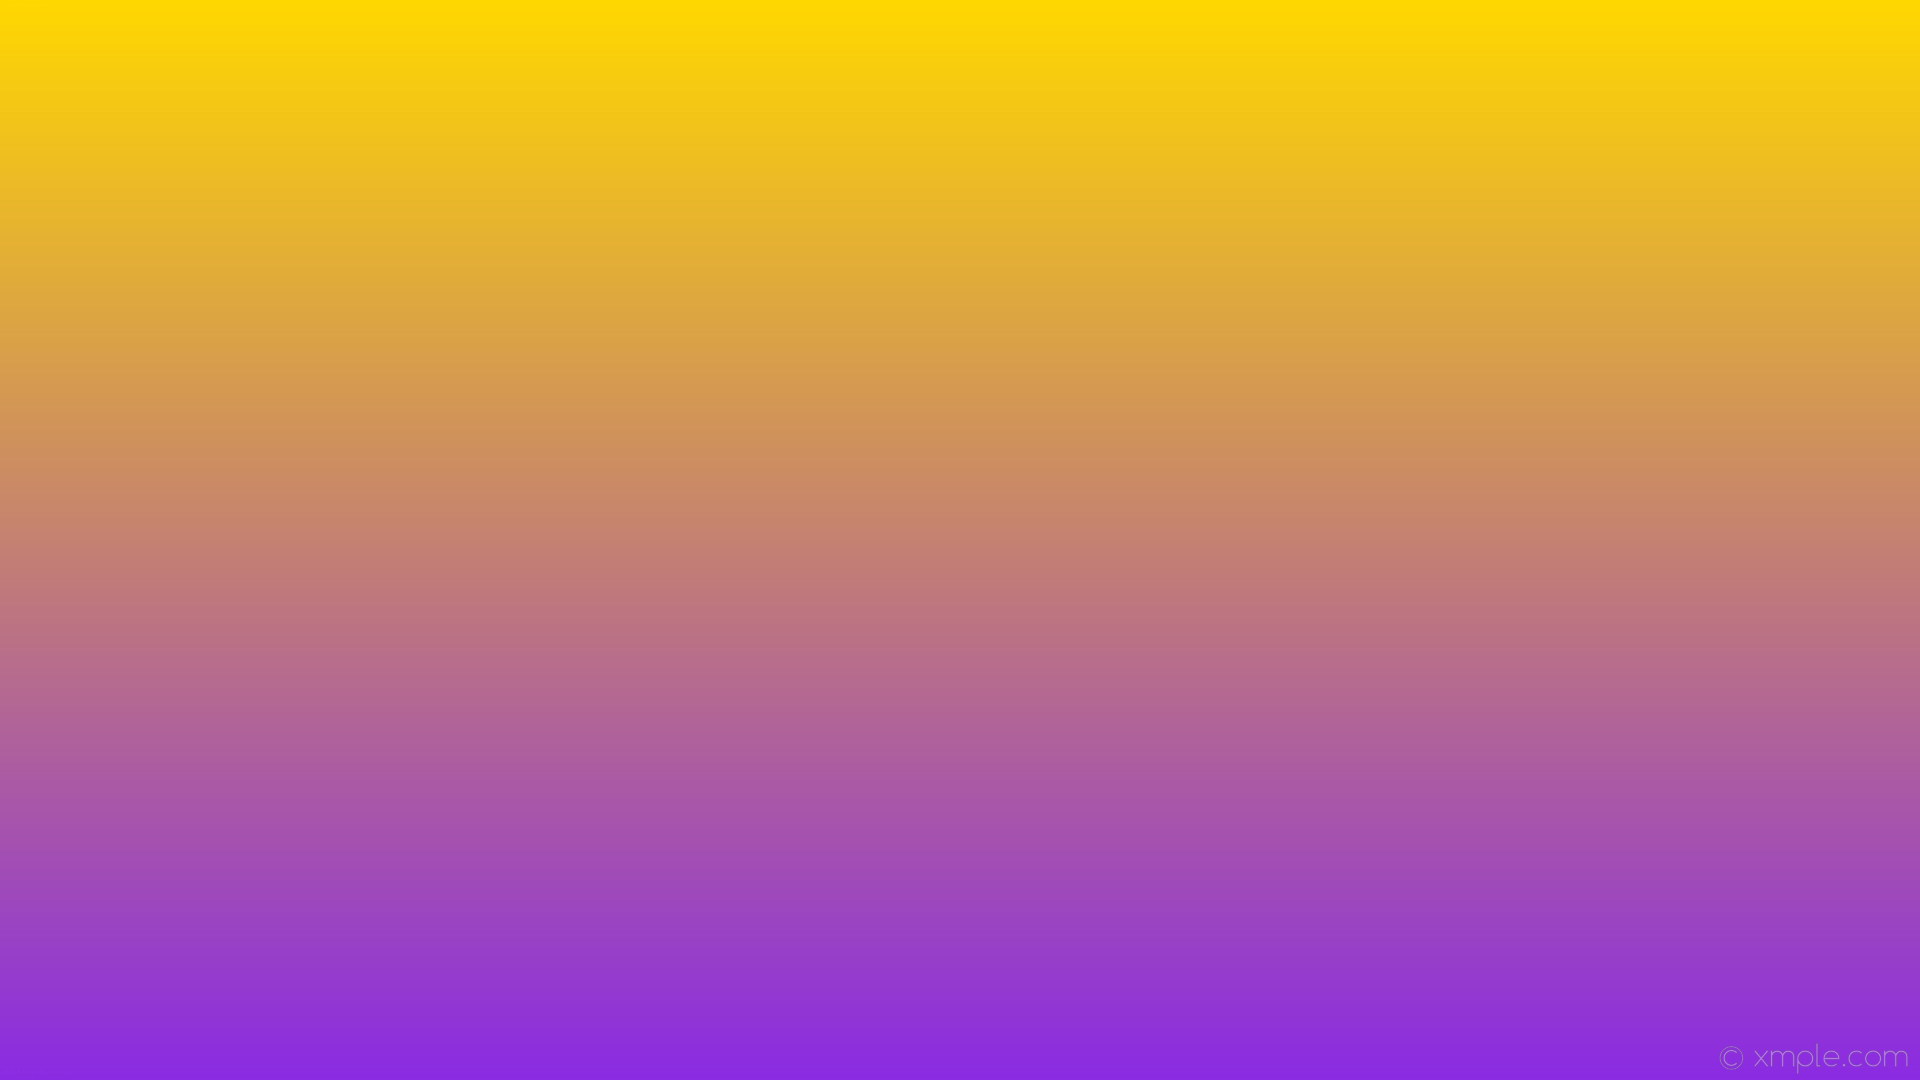 Wallpaper yellow gradient linear purple gold blue violet #ffd700 a2be2 90